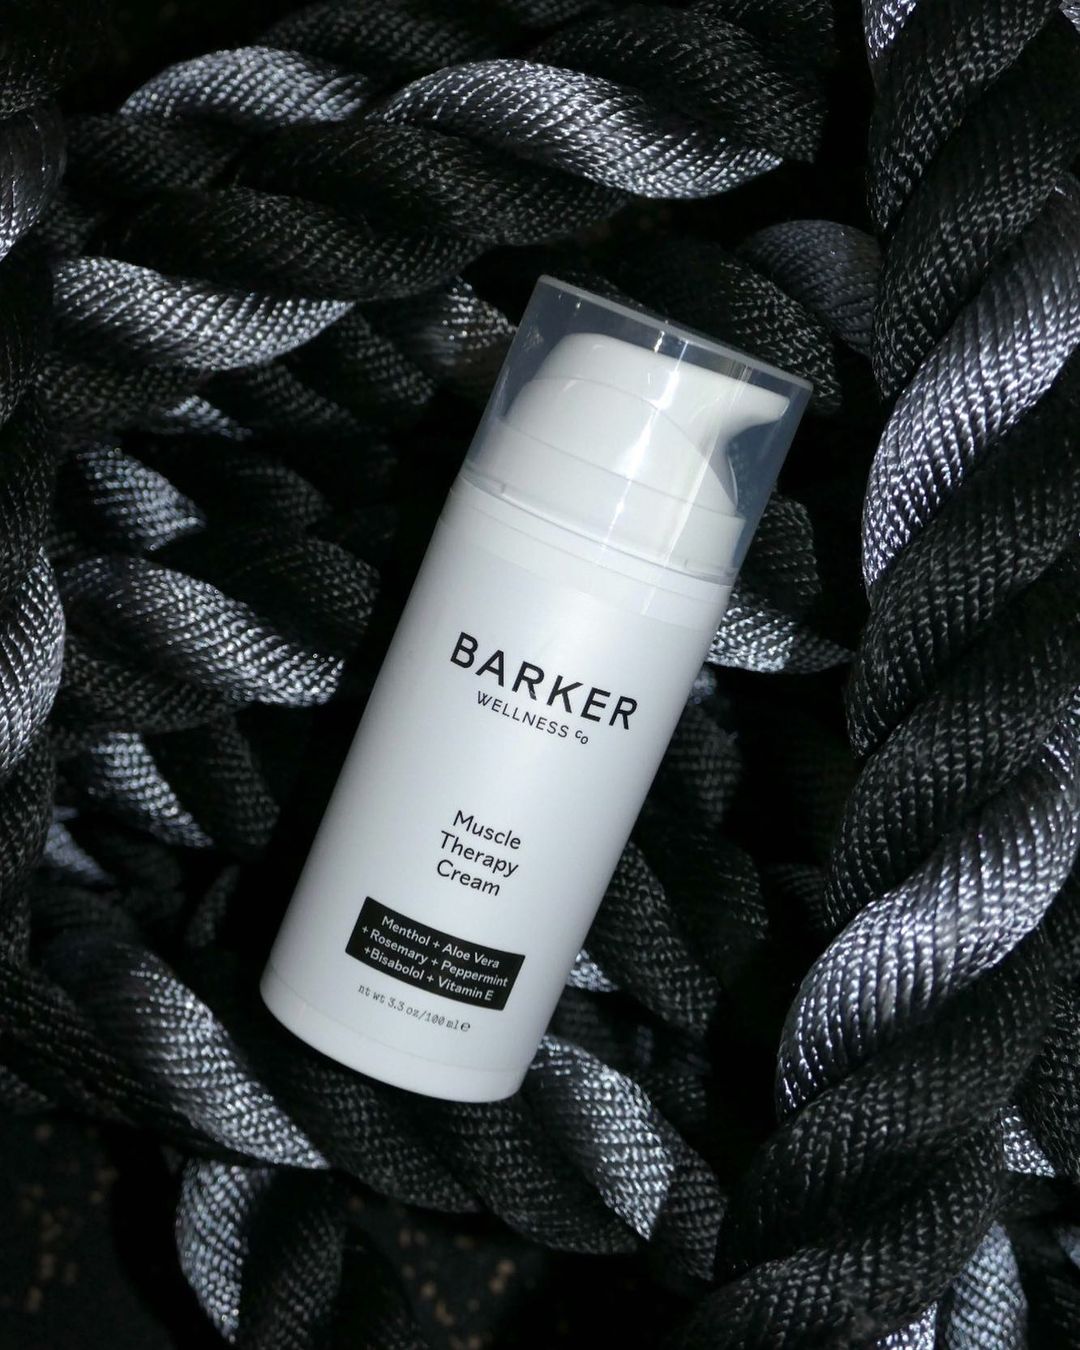 Barker Wellness Muscle Therapy Cream